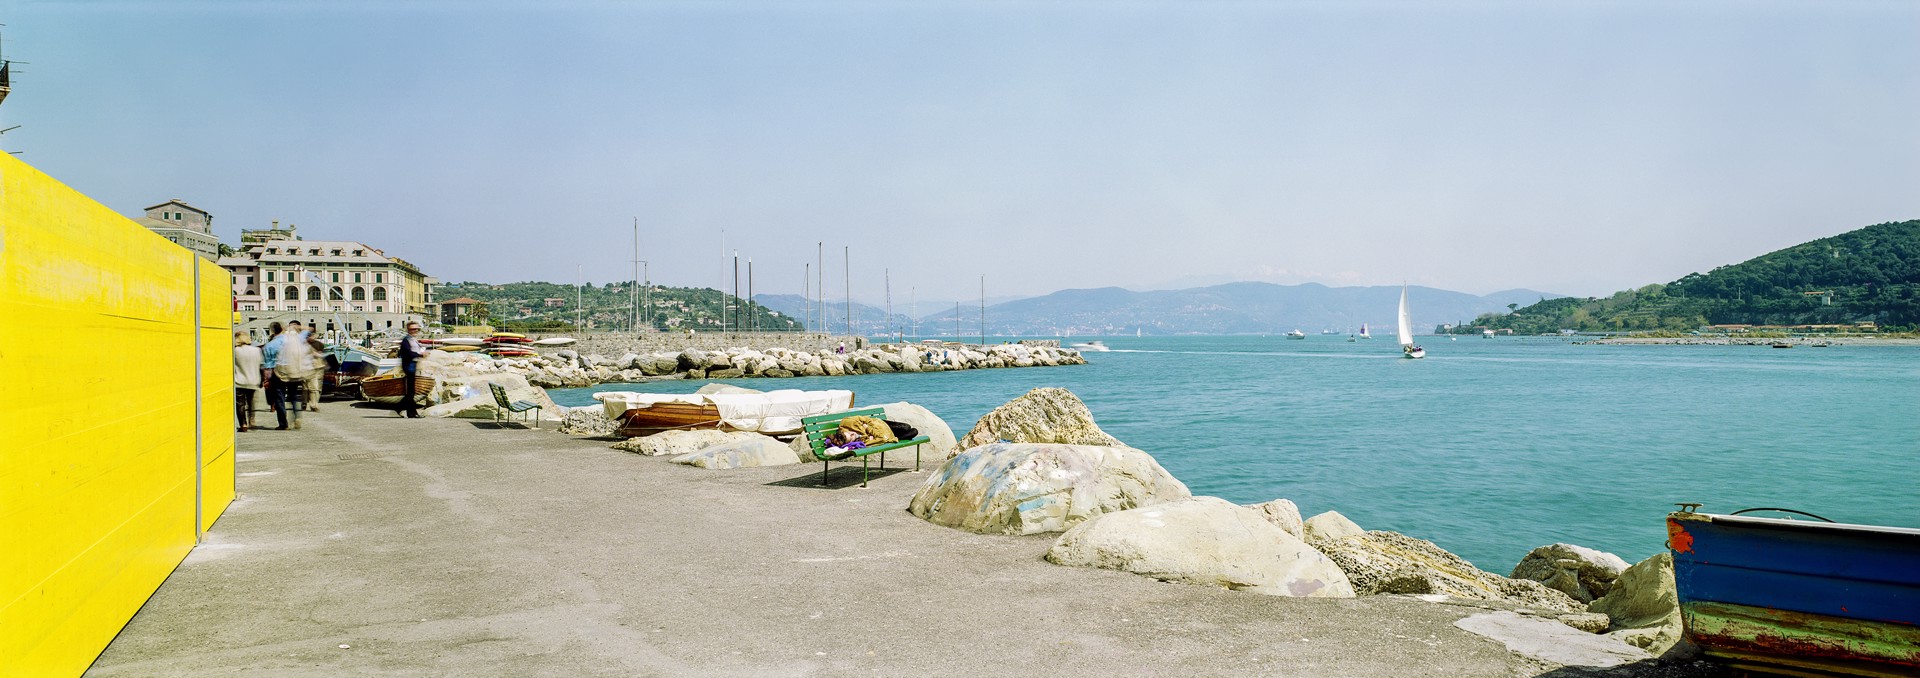 Man Sleeping on a Bench, View of Ocean Inlet, Portovenere, Italy by Lawrence McFarland